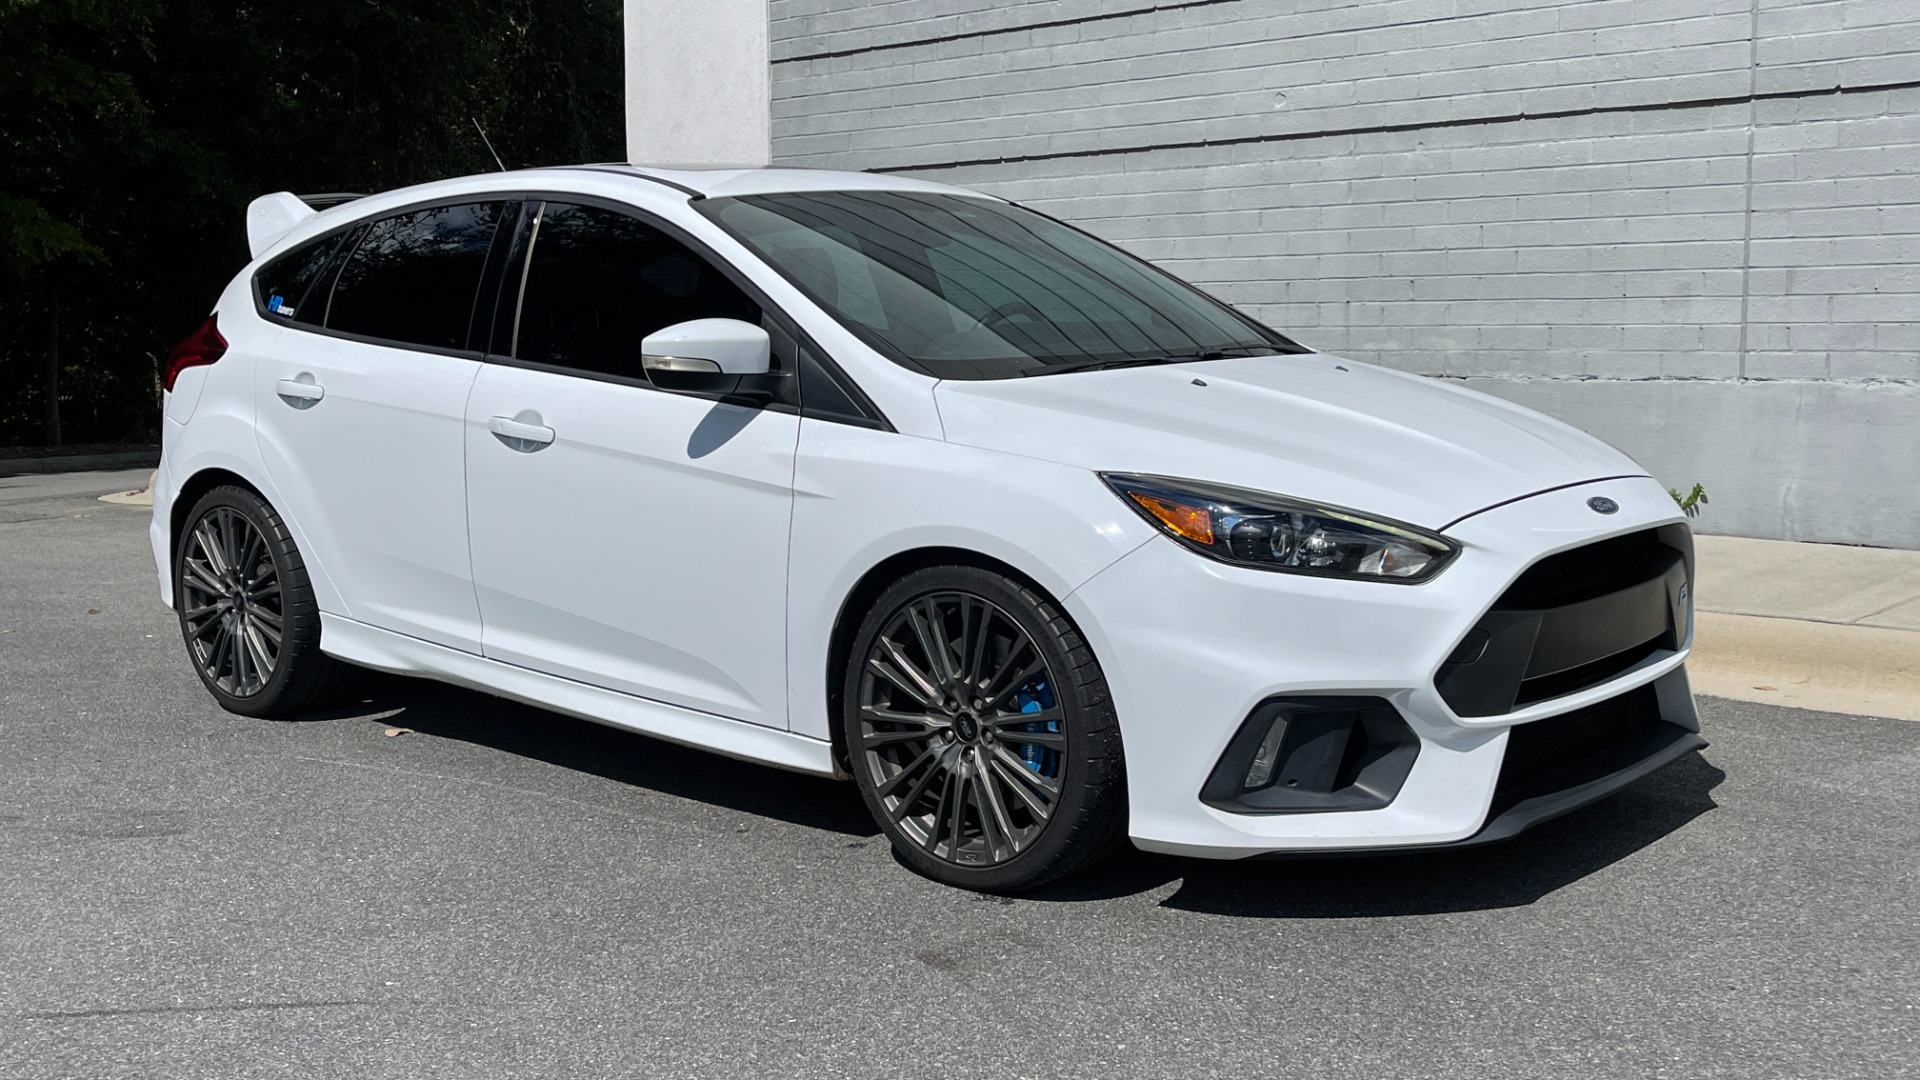 Used 2017 Ford Focus RS / SUNROOF / RS2 PACKAGE / RECAROS / MBRP EXHAUST / ALL WHEEL DRIVE for sale Sold at Formula Imports in Charlotte NC 28227 6